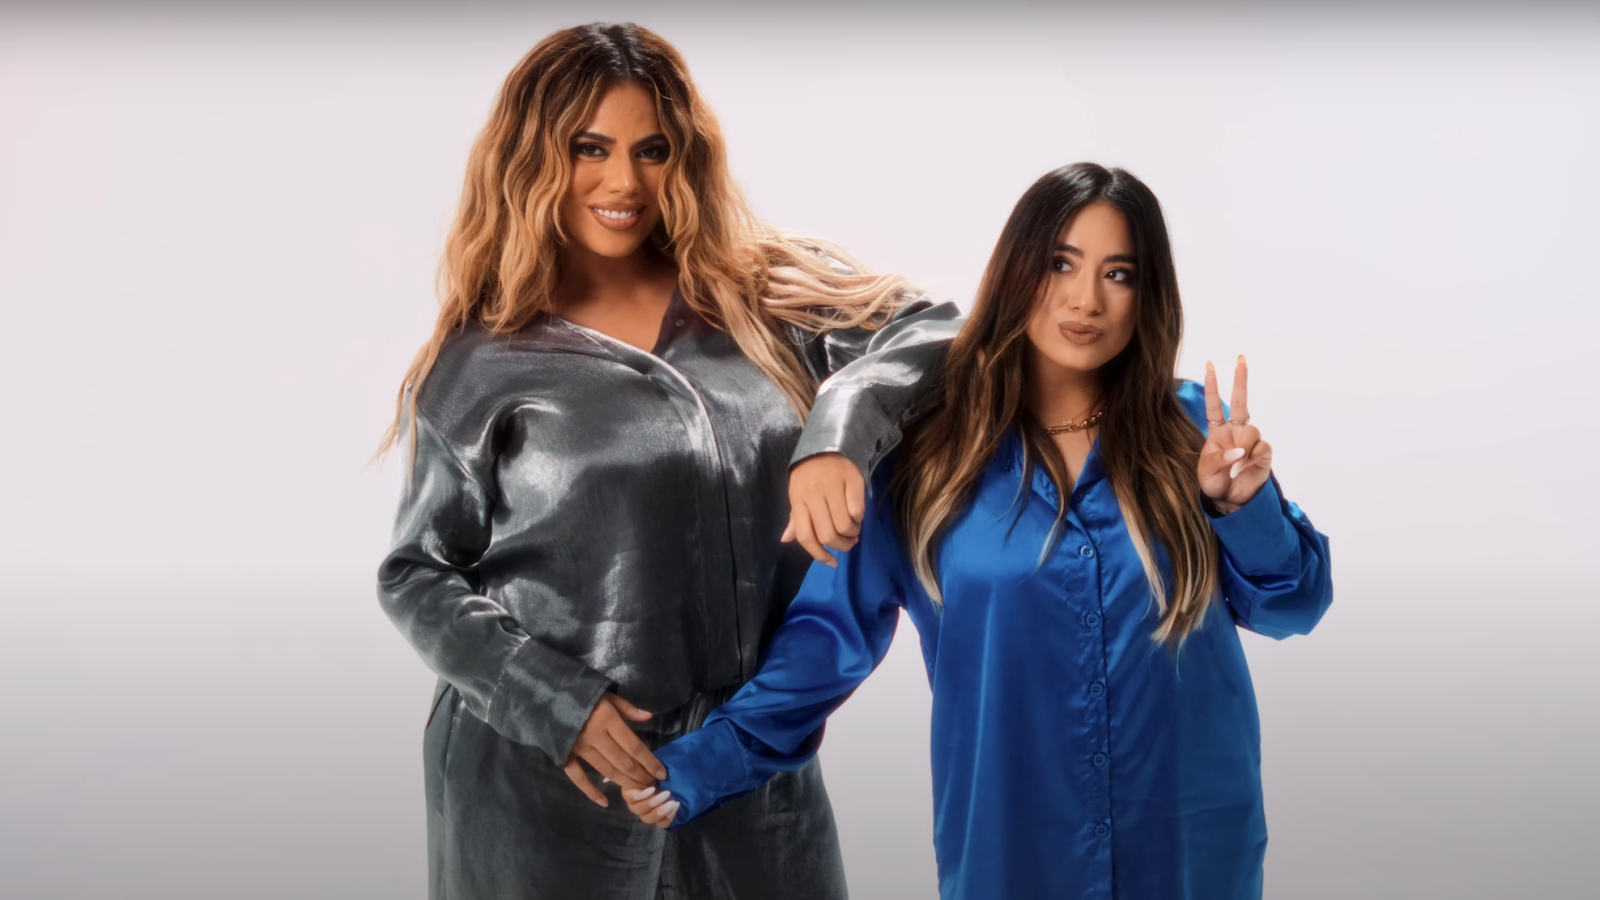 Ally Brooke and Dinah Jane Give Fifth Harmony Fans A Gift With Have Yourself A Merry Little Christmas